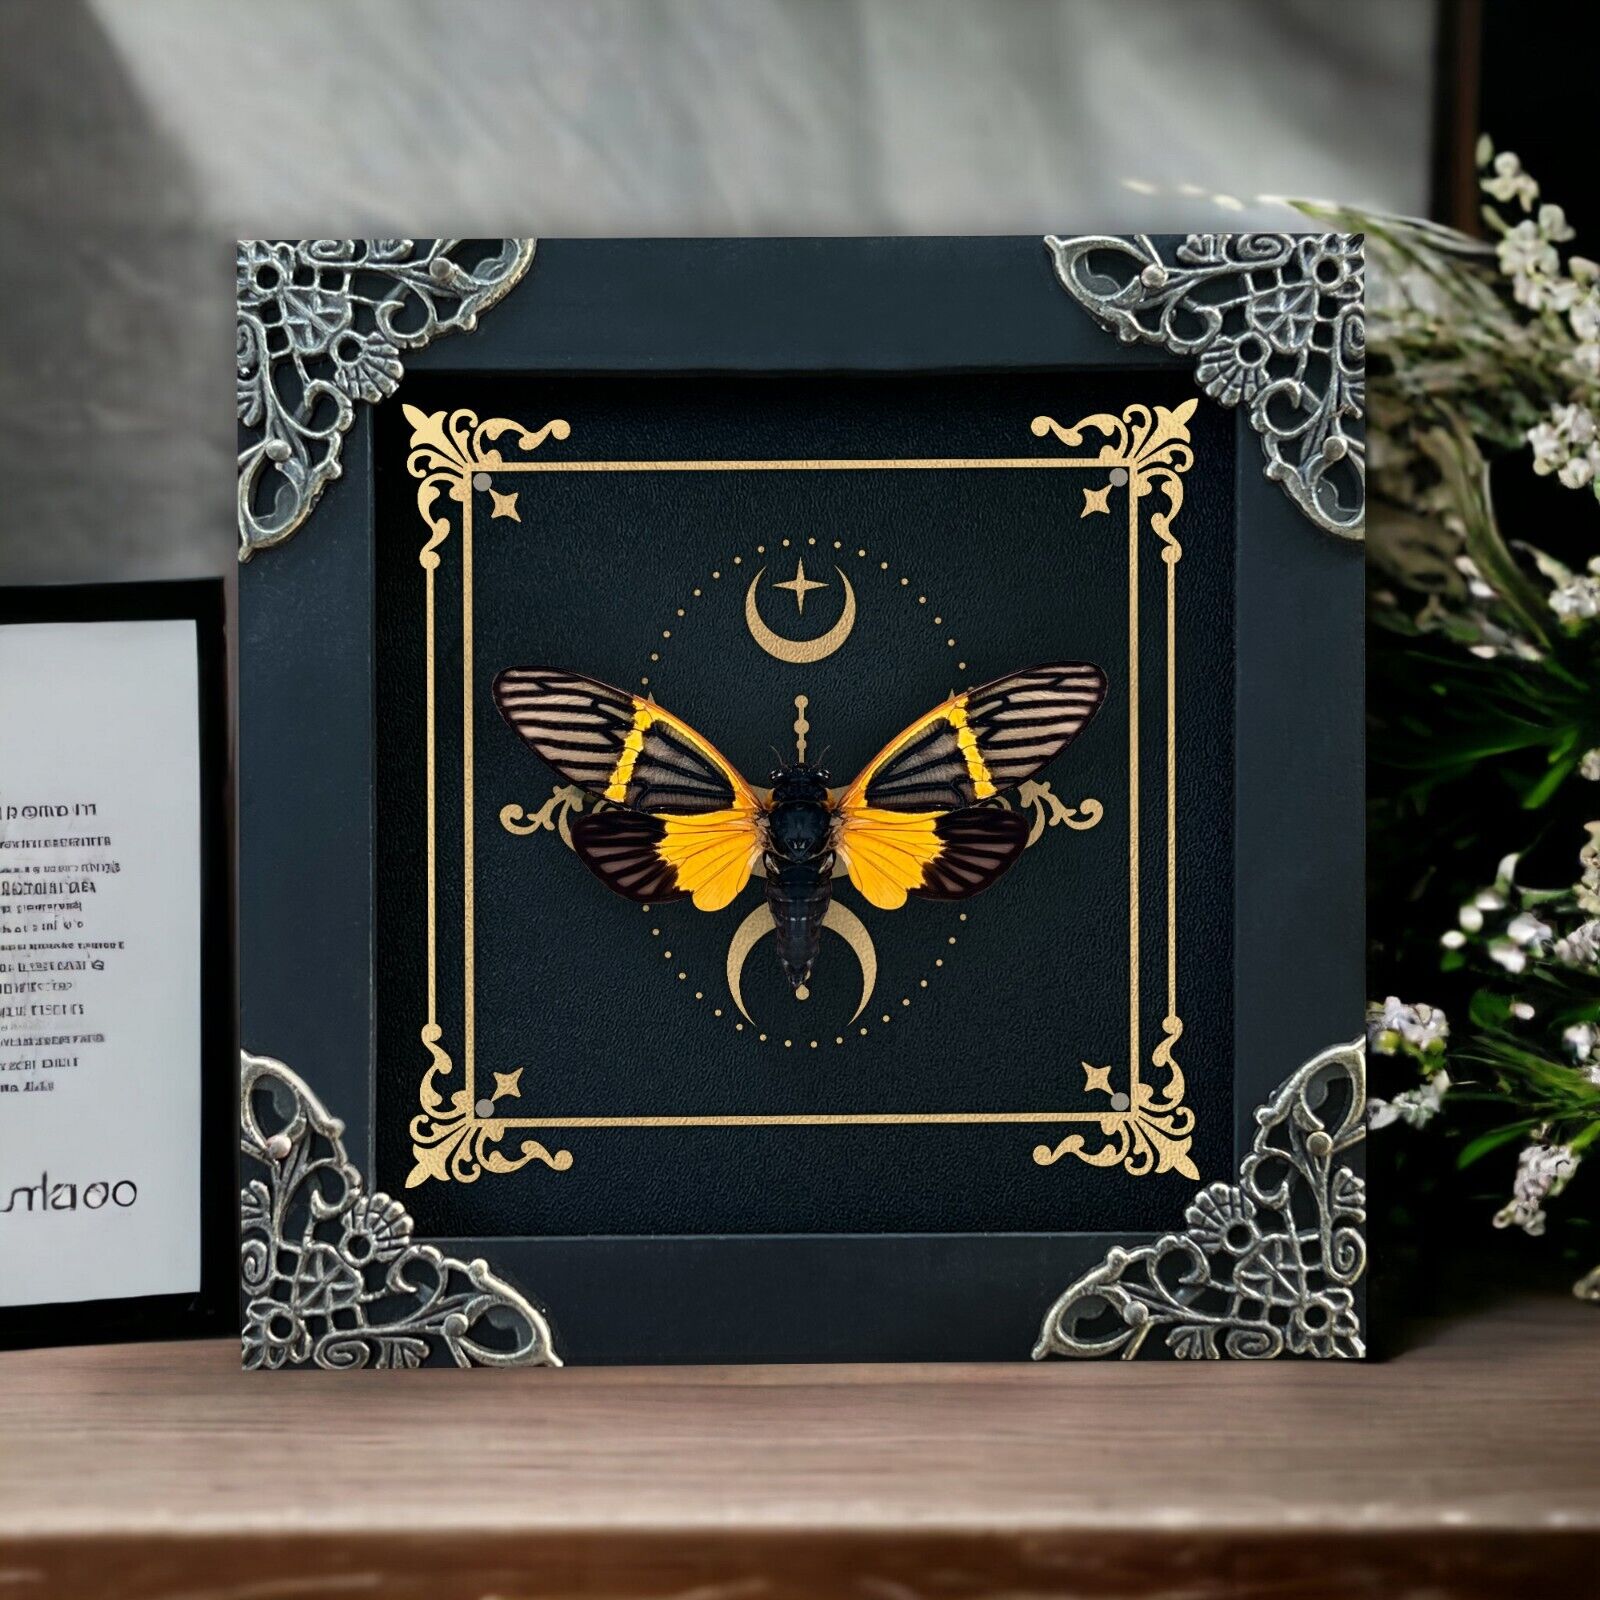 Real Cicada Framed Wall Hanging Decor Taxidermy Insect Astronomy Shadow Box